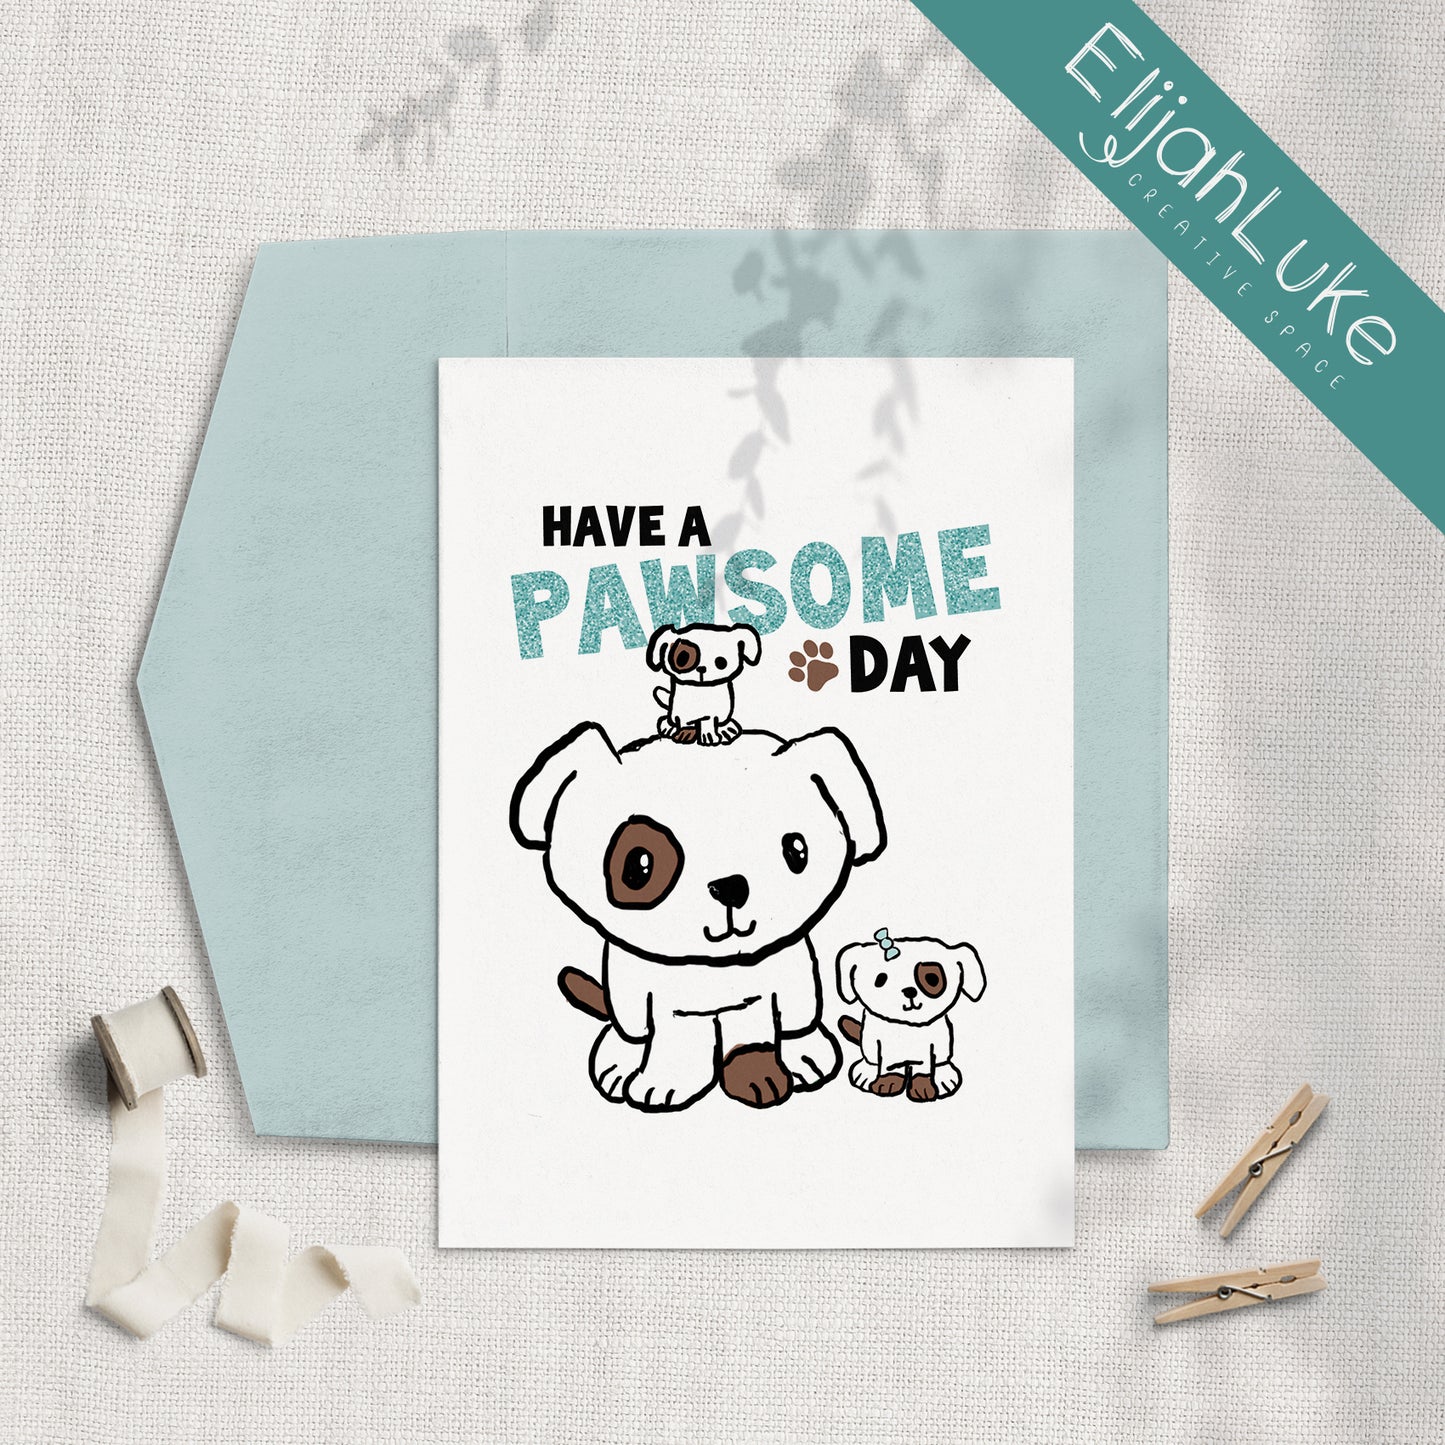 Have a Pawsome Day 5x7 Glittered Greeting Card by Elijah Luke